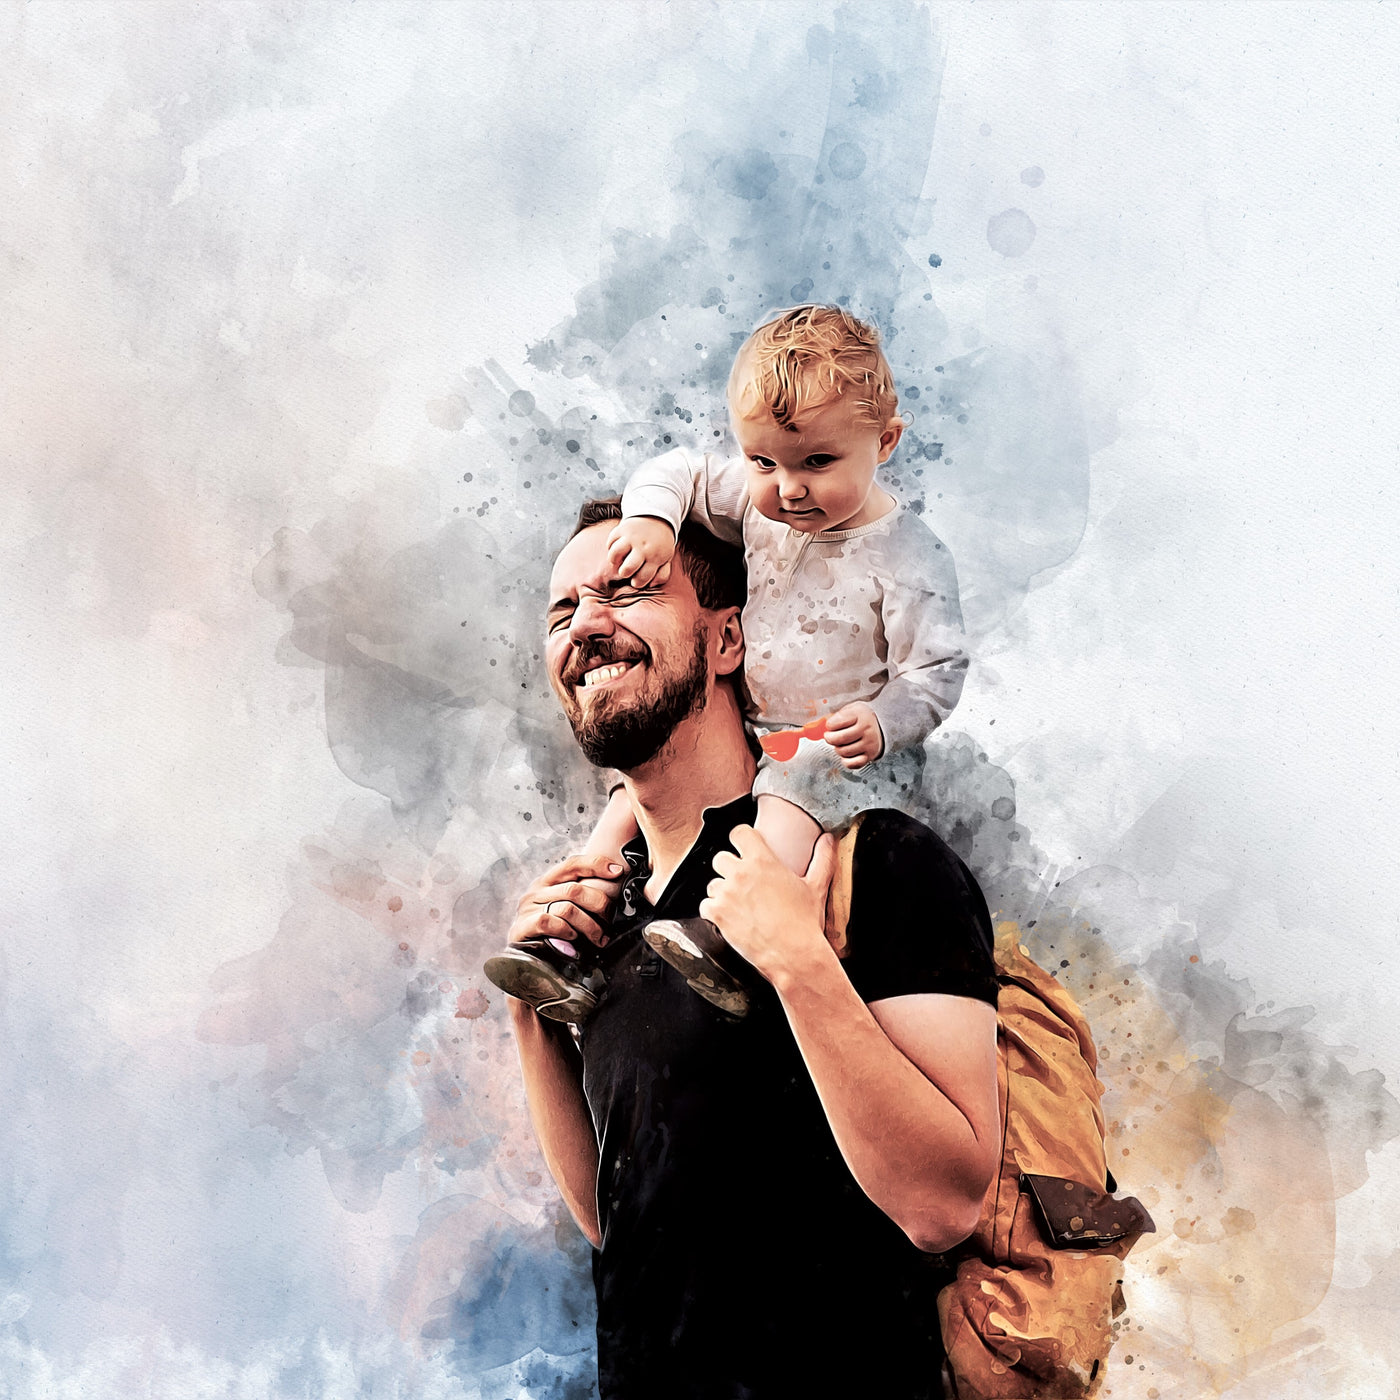 Dad and Baby Portrait Watercolor Art | Personalized Gift for Family with Kids